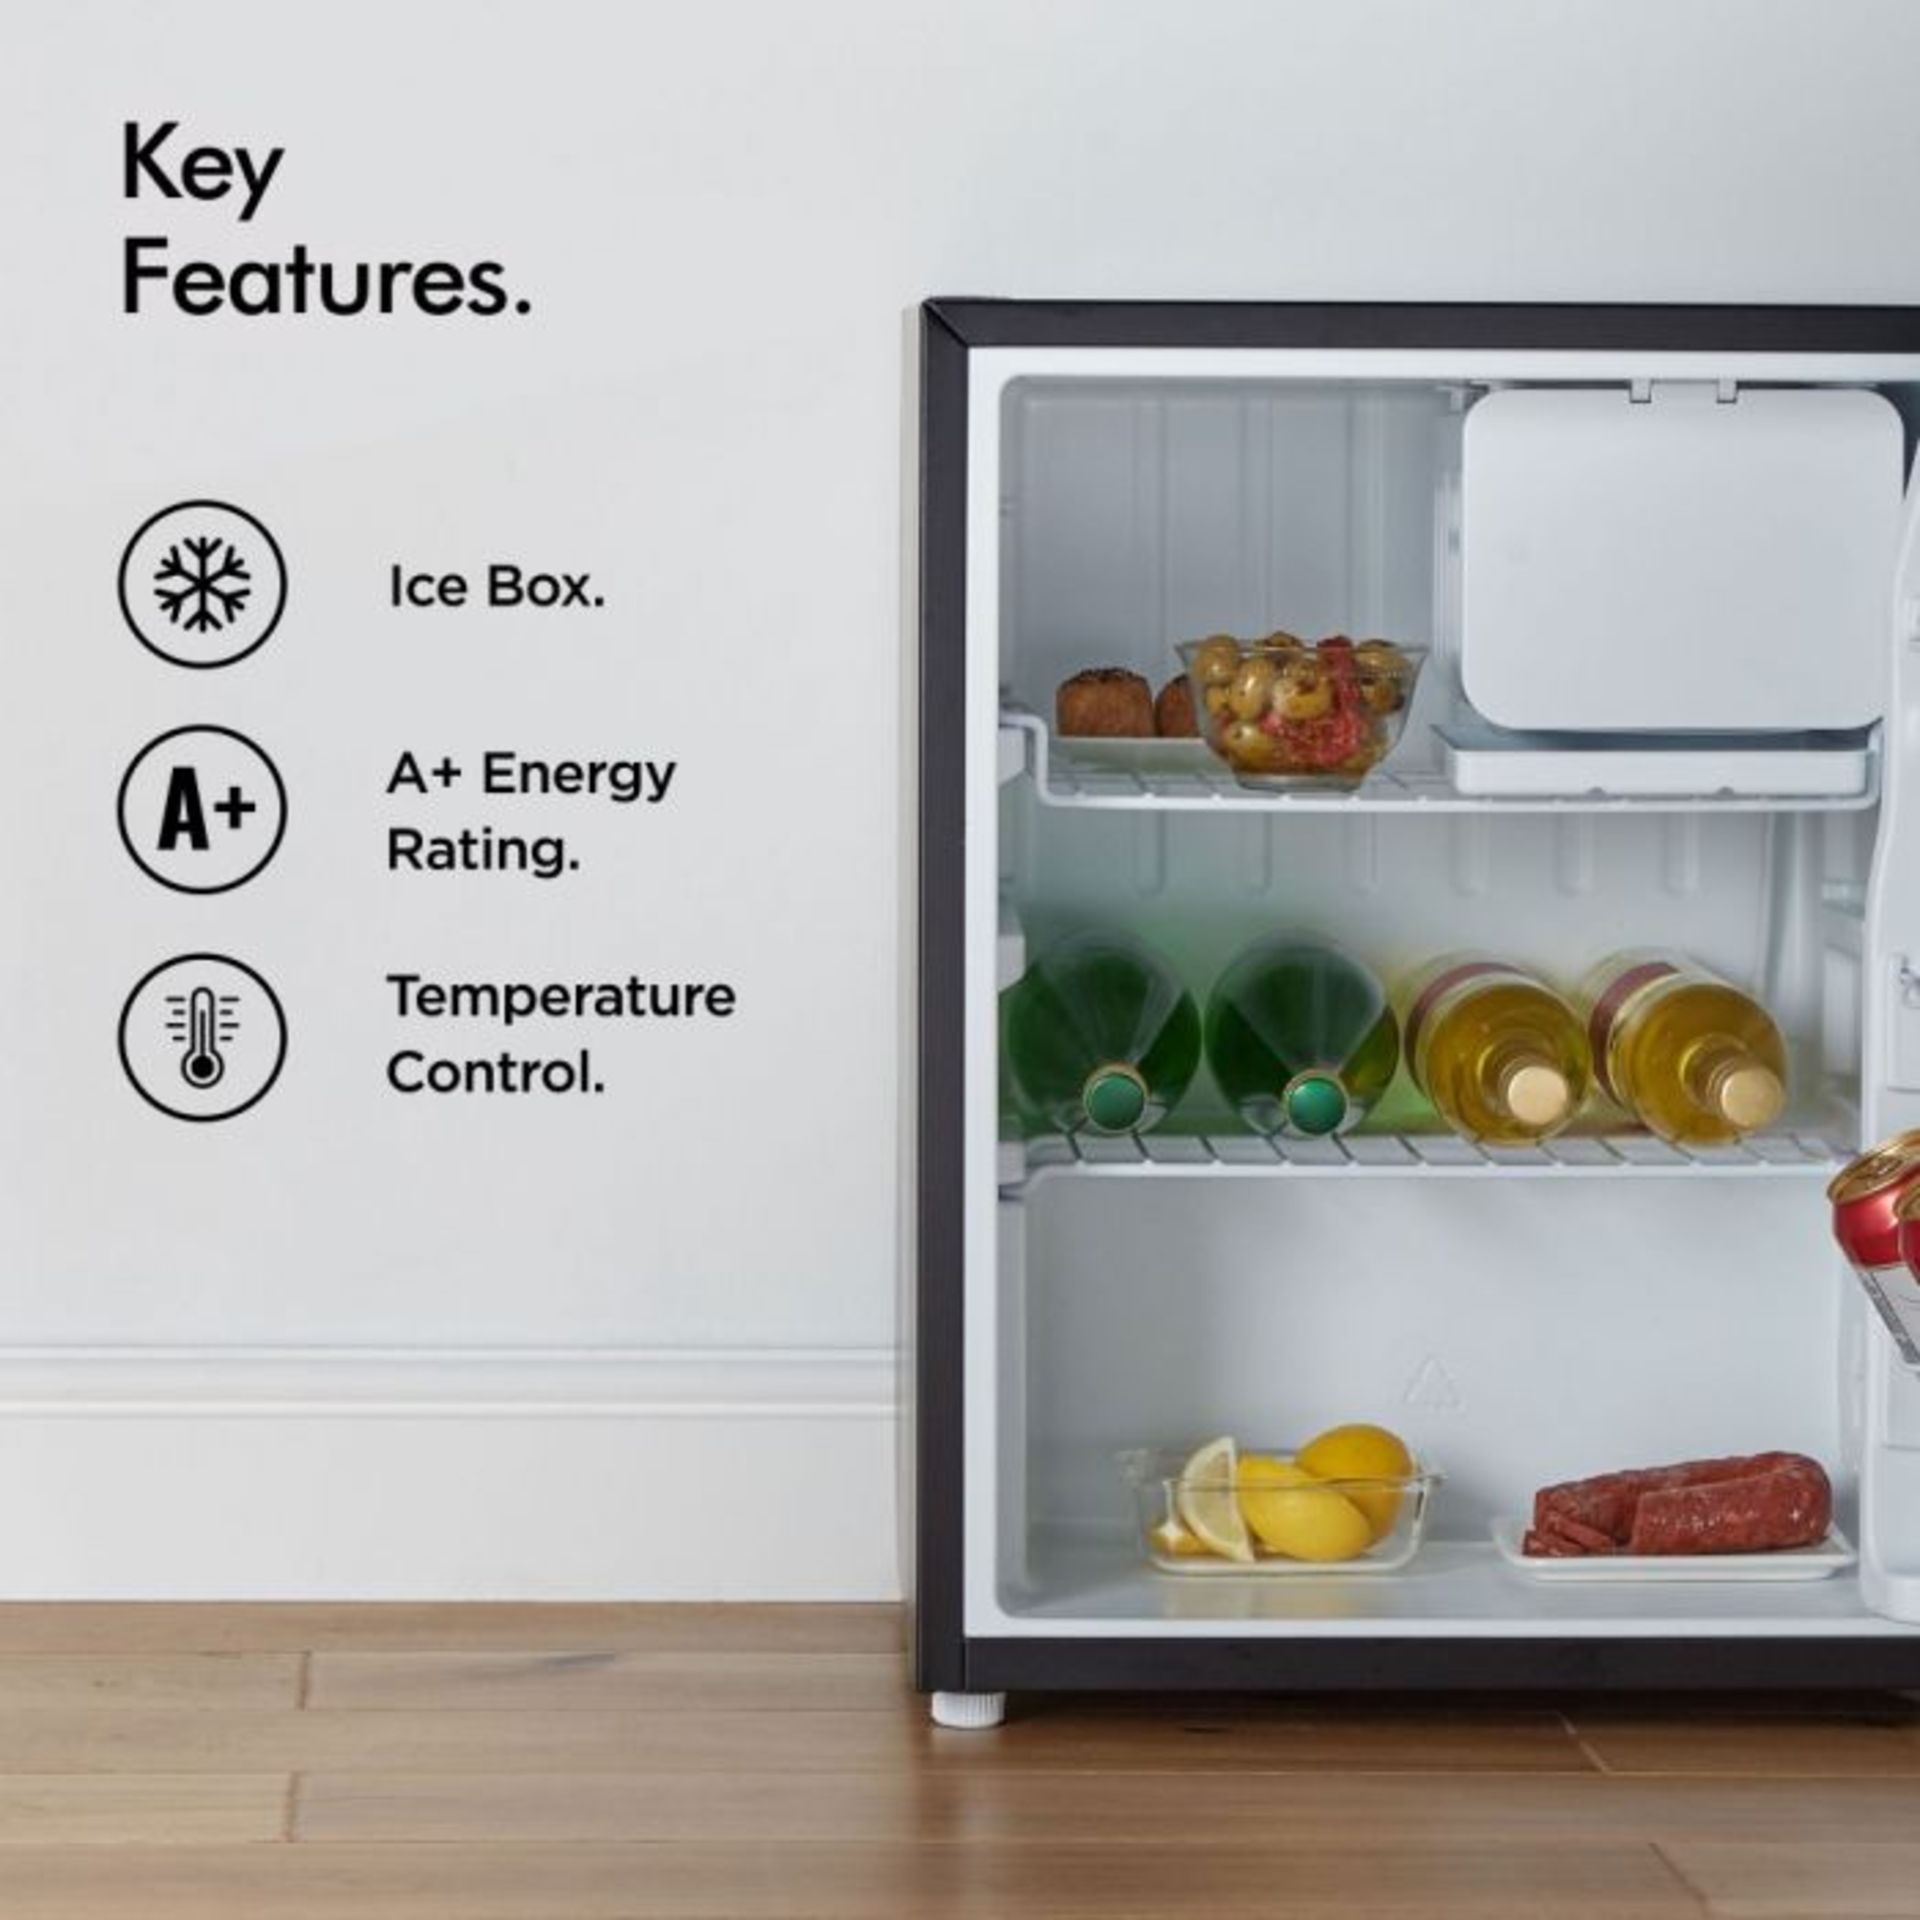 (S427) 75L Under Counter Fridge with Ice Box 75 litre fridge and ice box compartment in one co... - Image 3 of 3